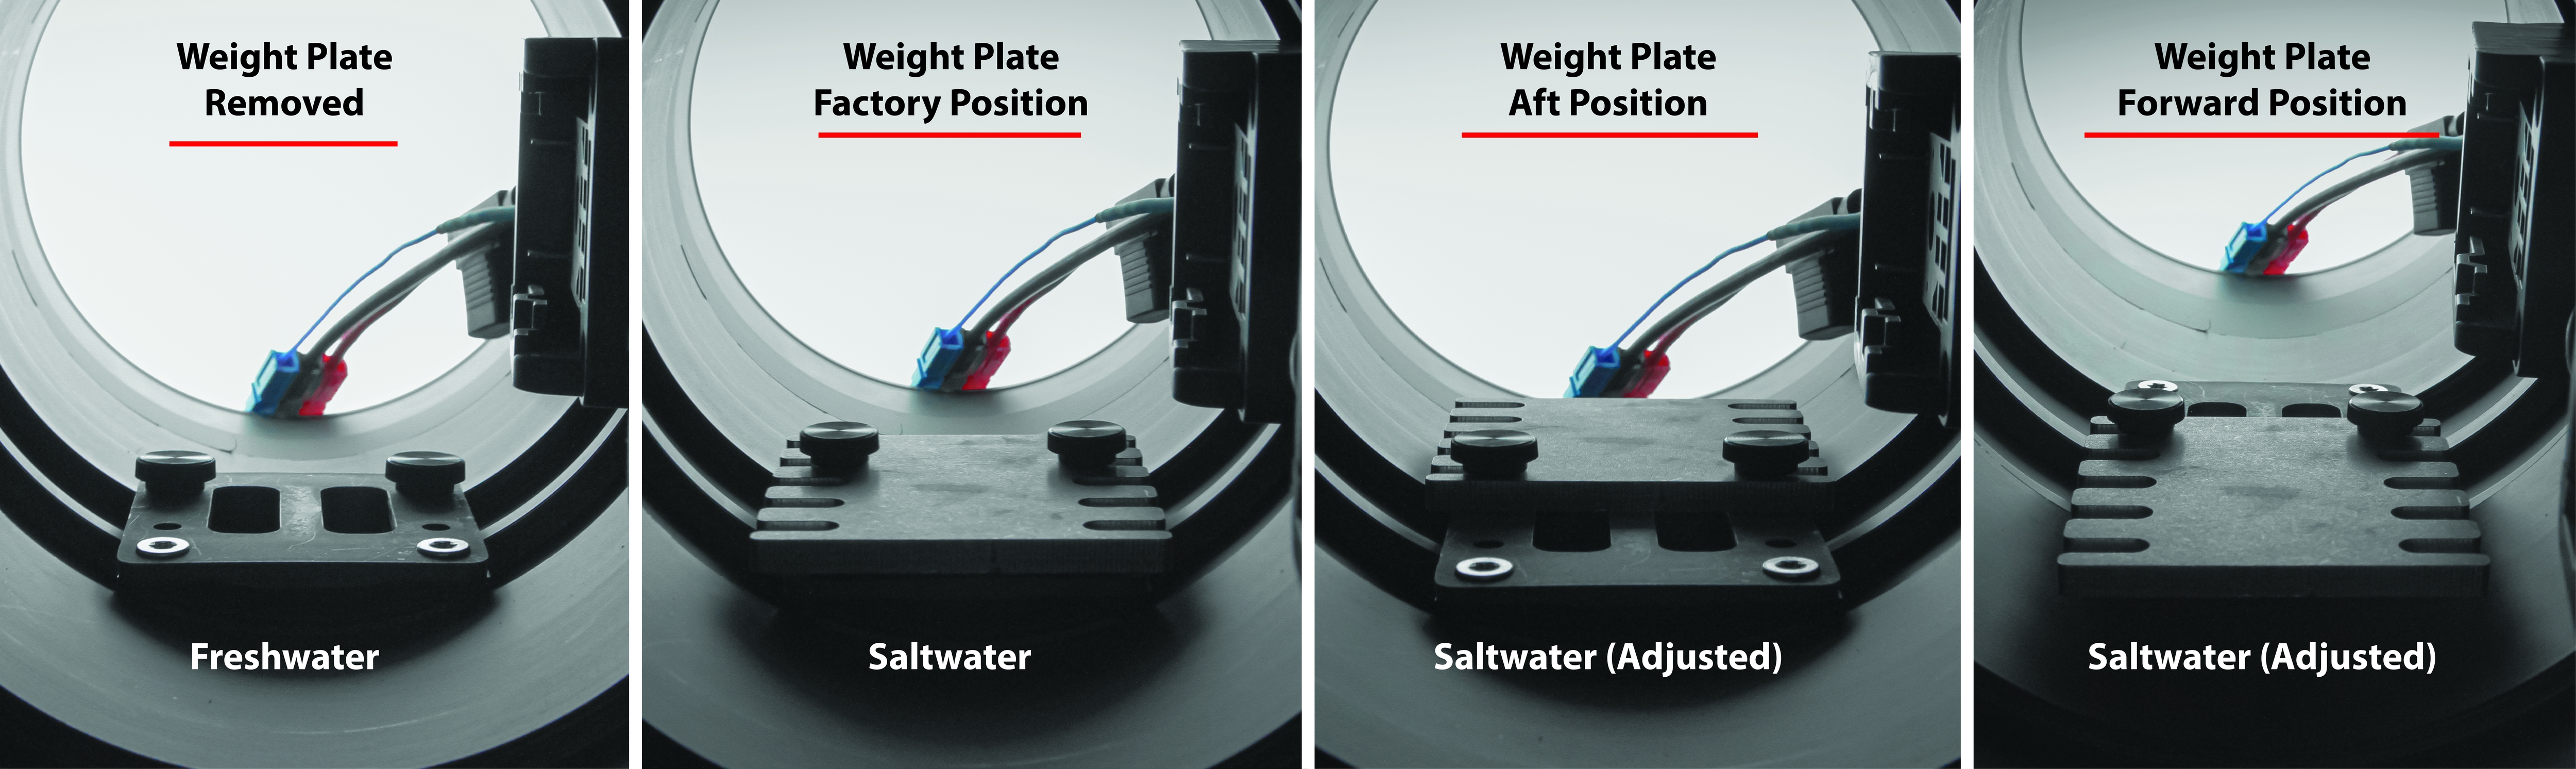 Saltwater_Weight_Plate_Configurations.jpg